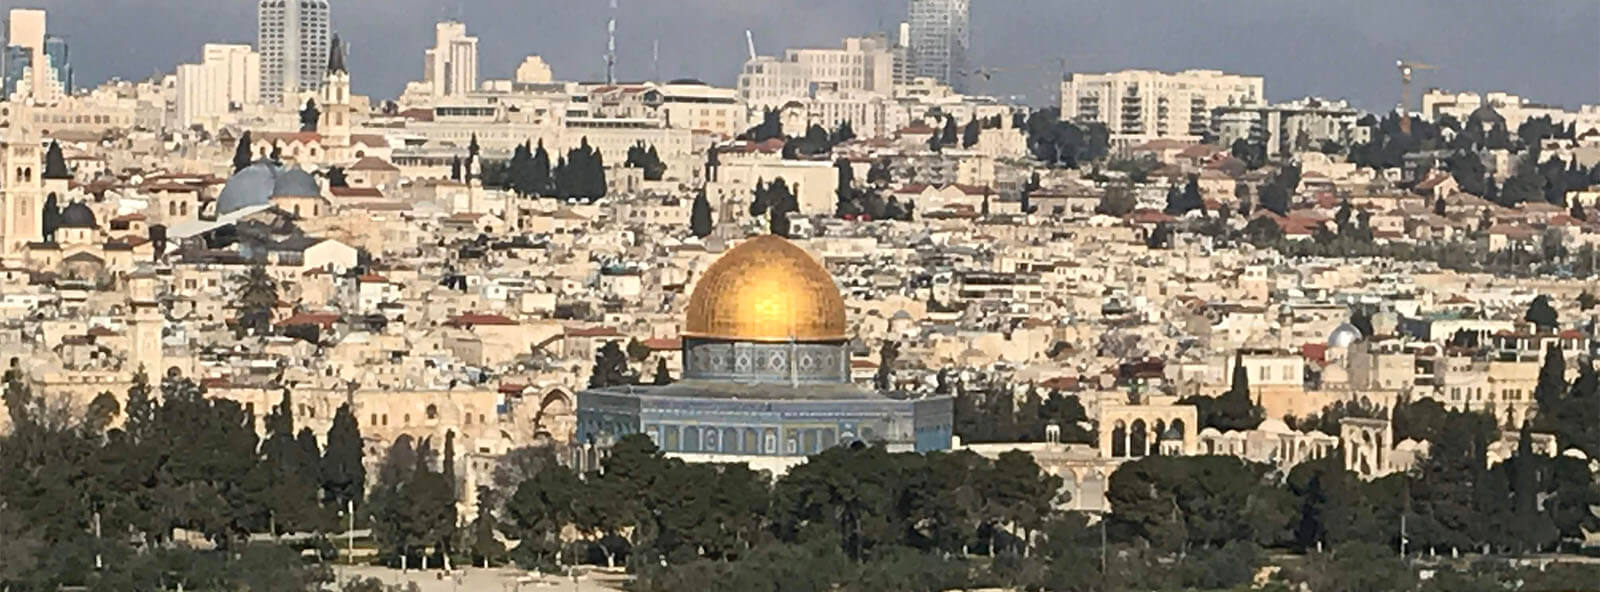 Panoramic view that includes Temple Mount in Jerusalem